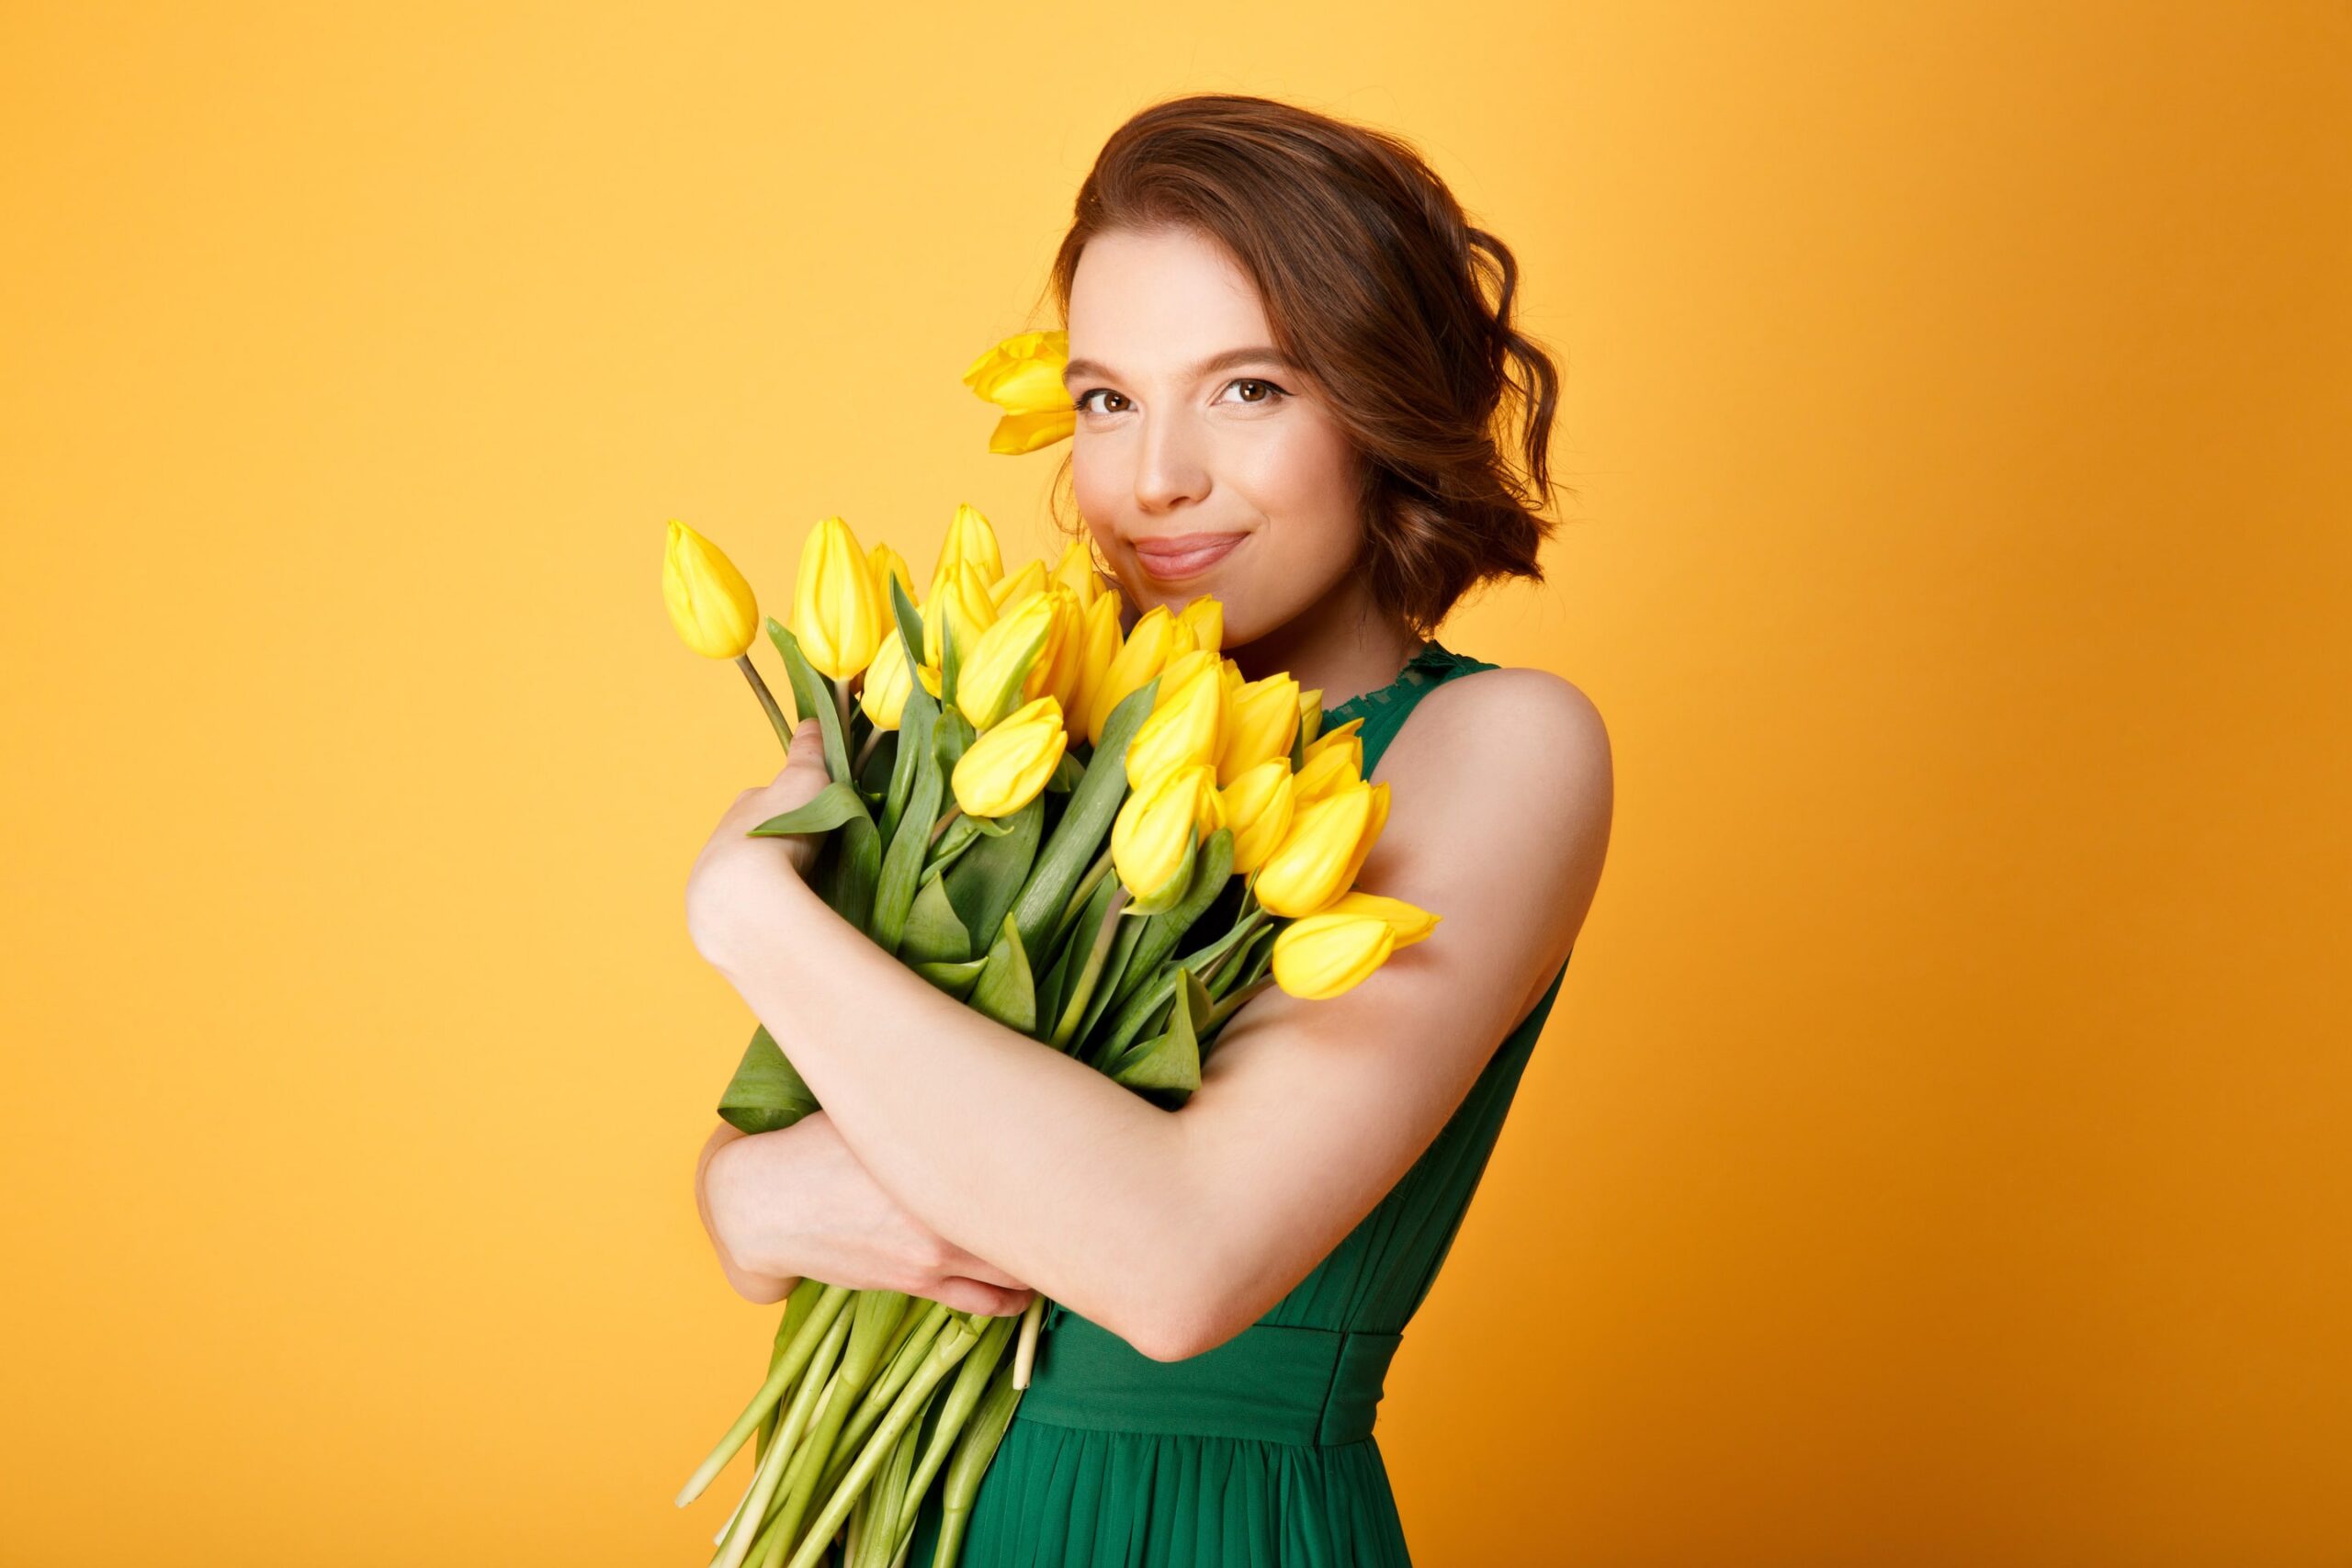 3 Easy Tips for Beautiful Spring-Ready Skin